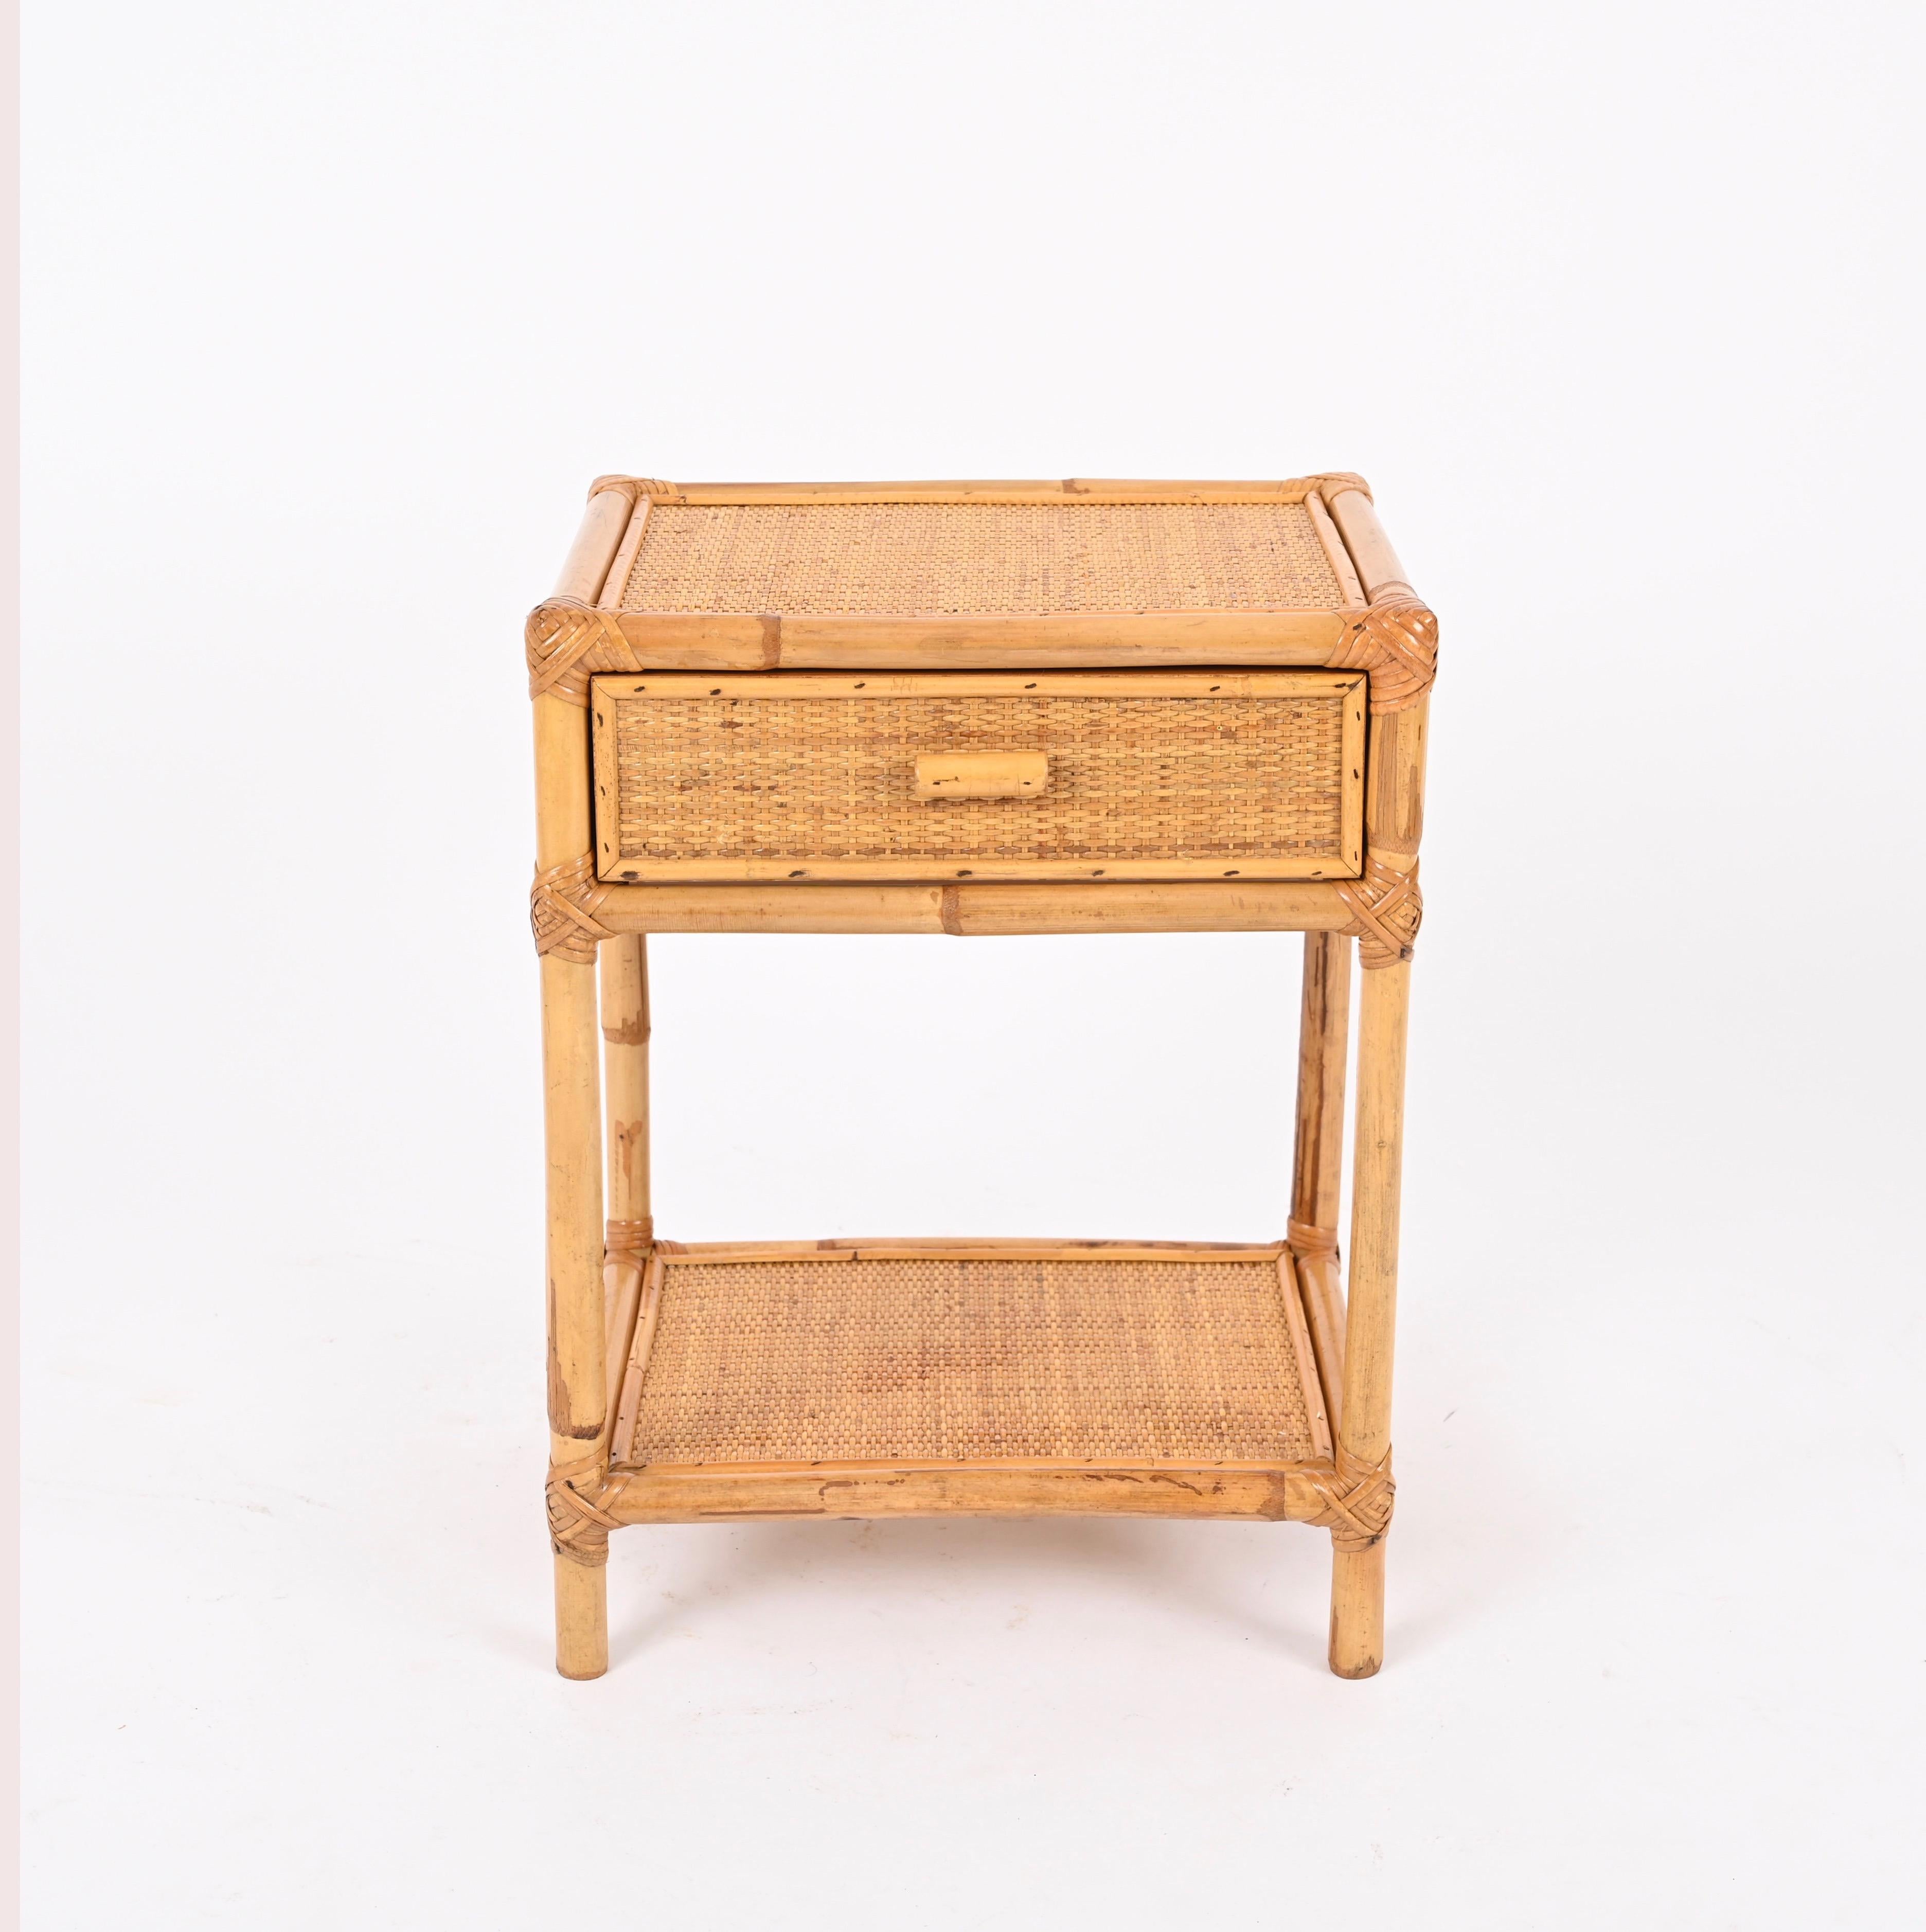 Hand-Crafted Pair of French Riviera Nightstands in Rattan, Bamboo and Wicker, Italy 1970s